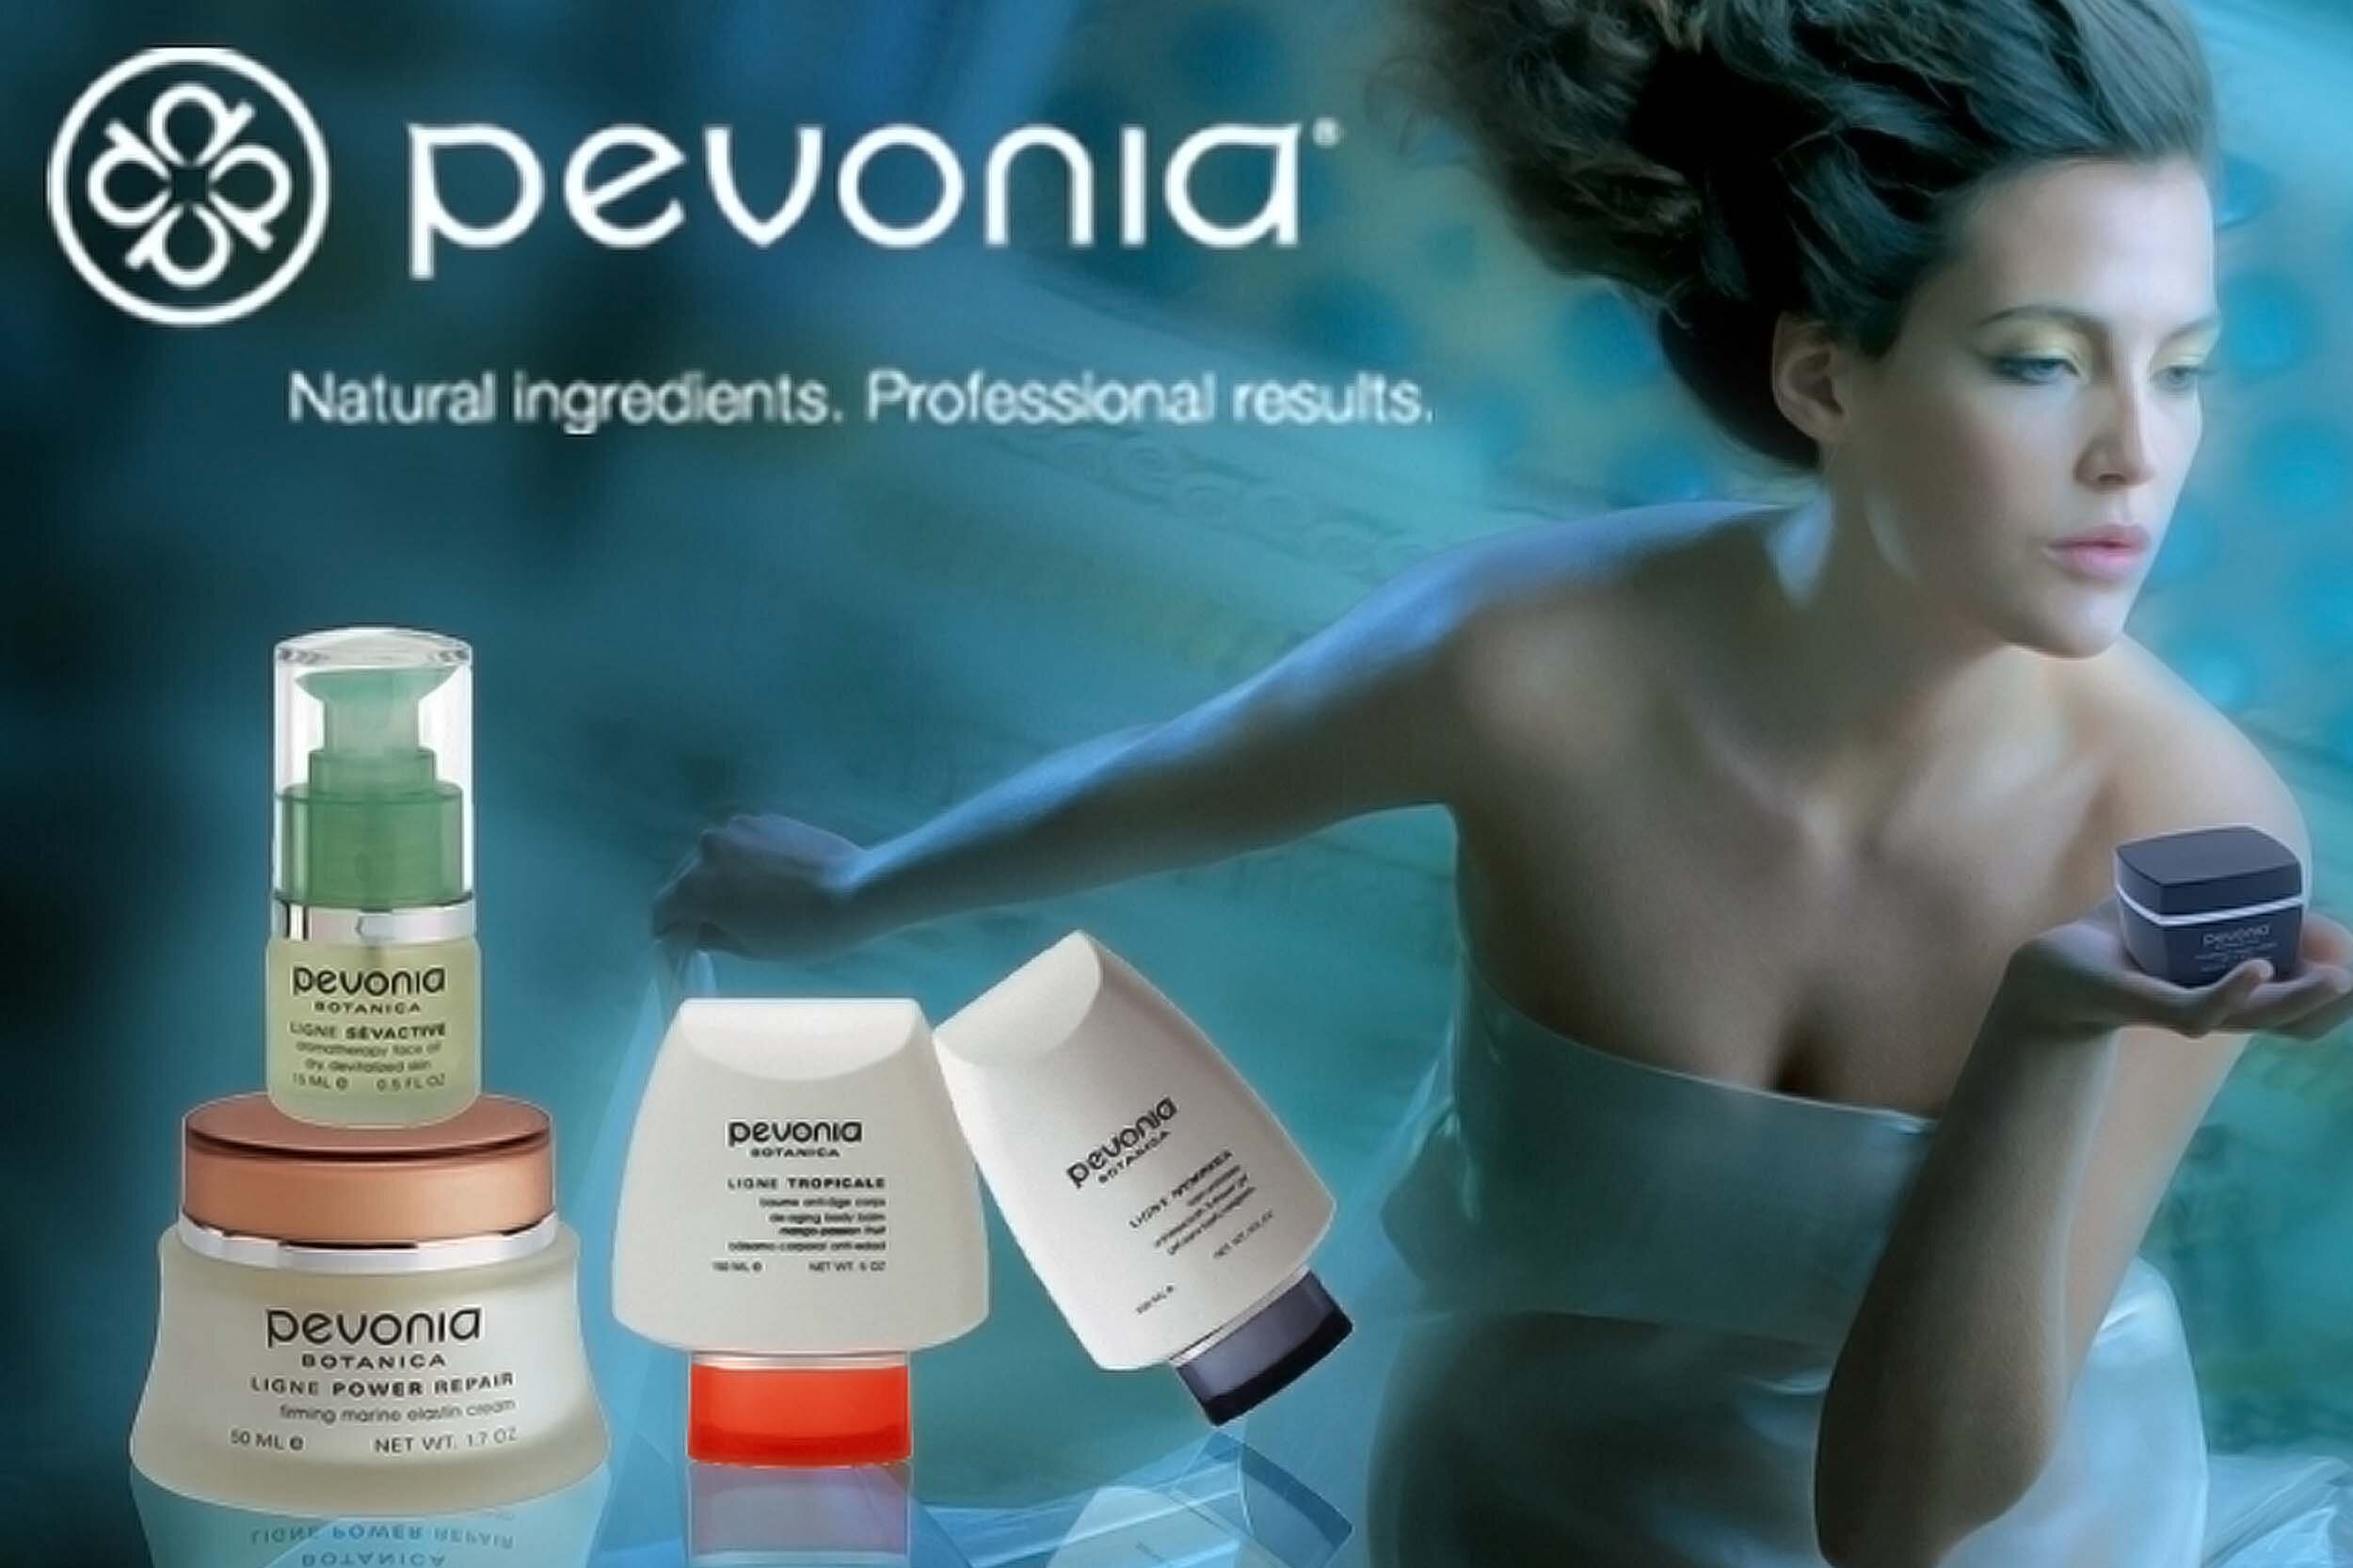 skinglow-pevonia-products.jpg